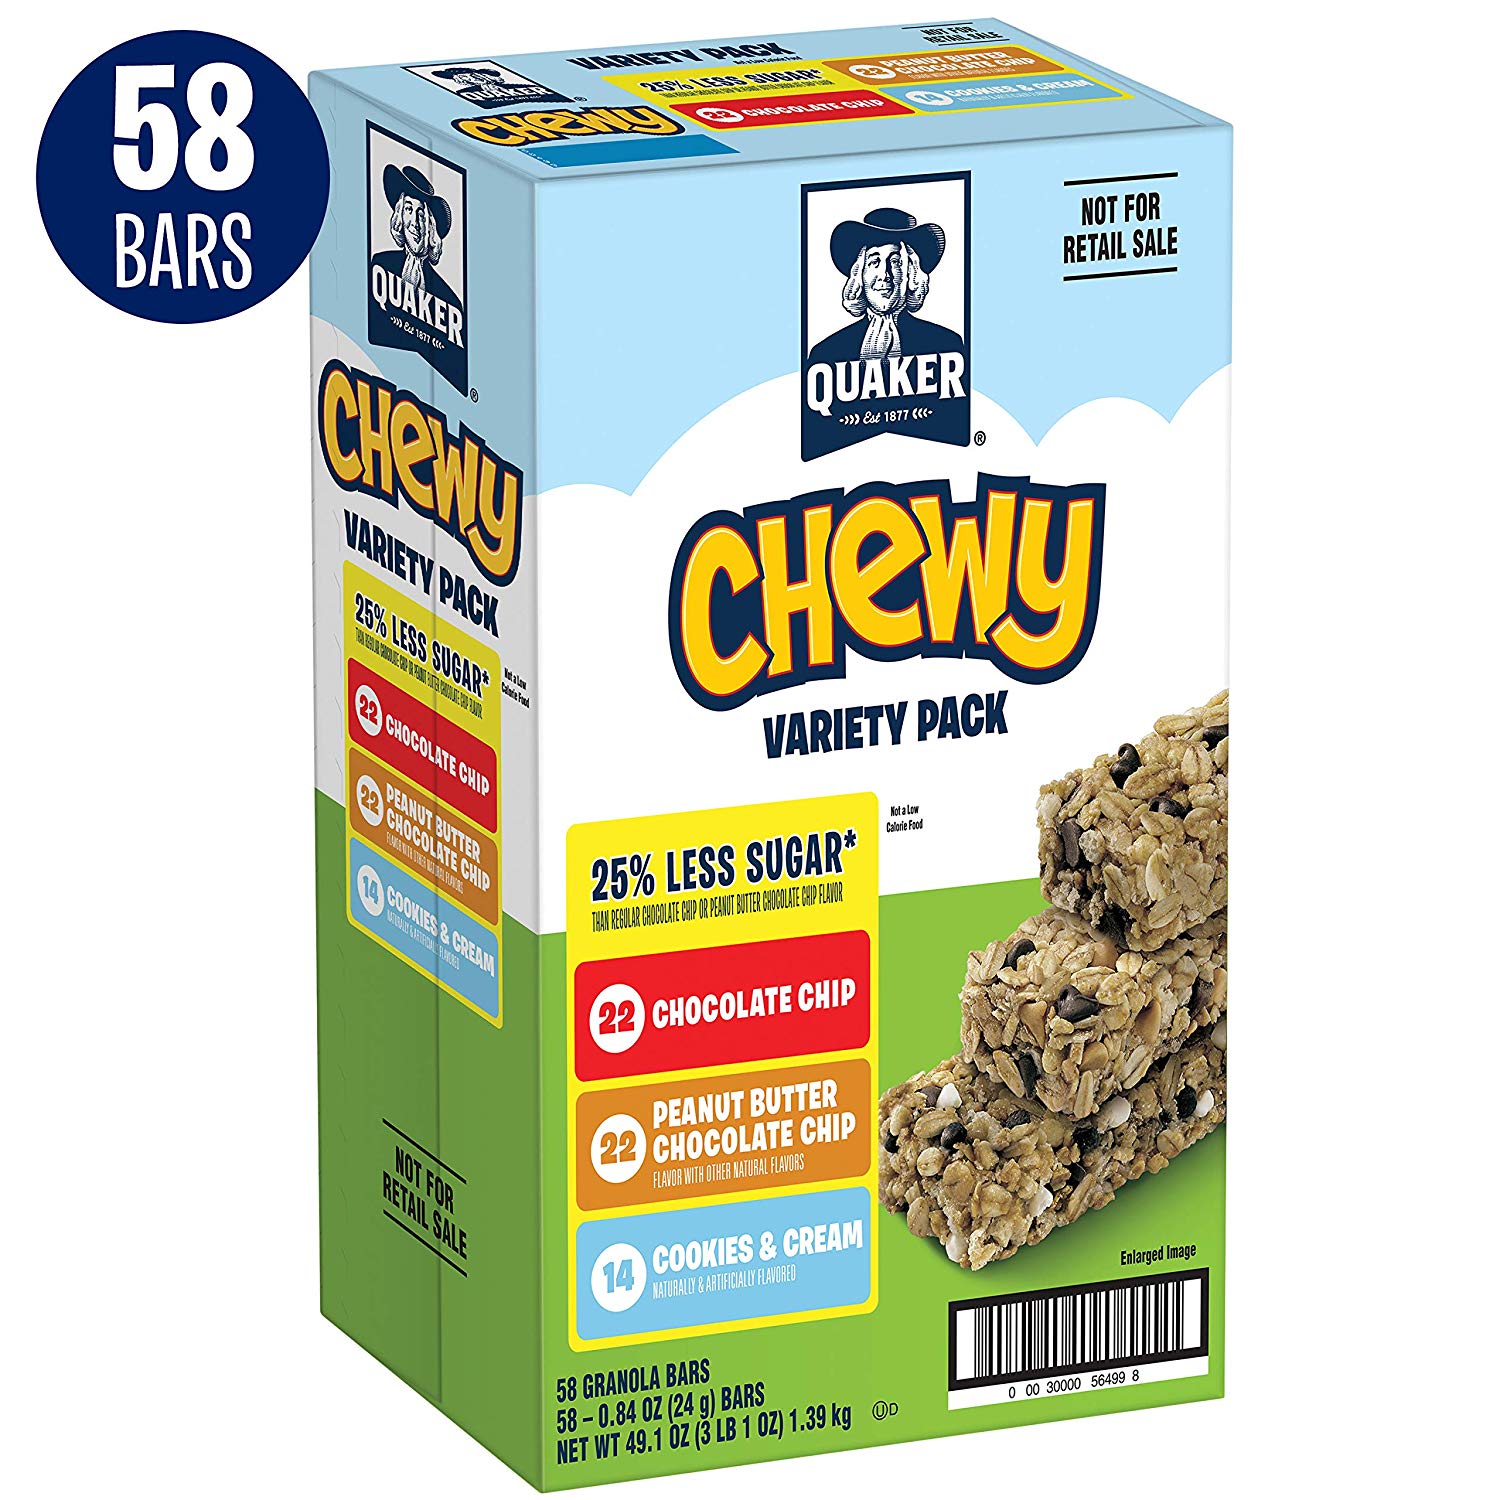 Quaker Chewy Granola Bars (Less Sugar) Variety Pack 58 Count Only $9.02 Shipped!